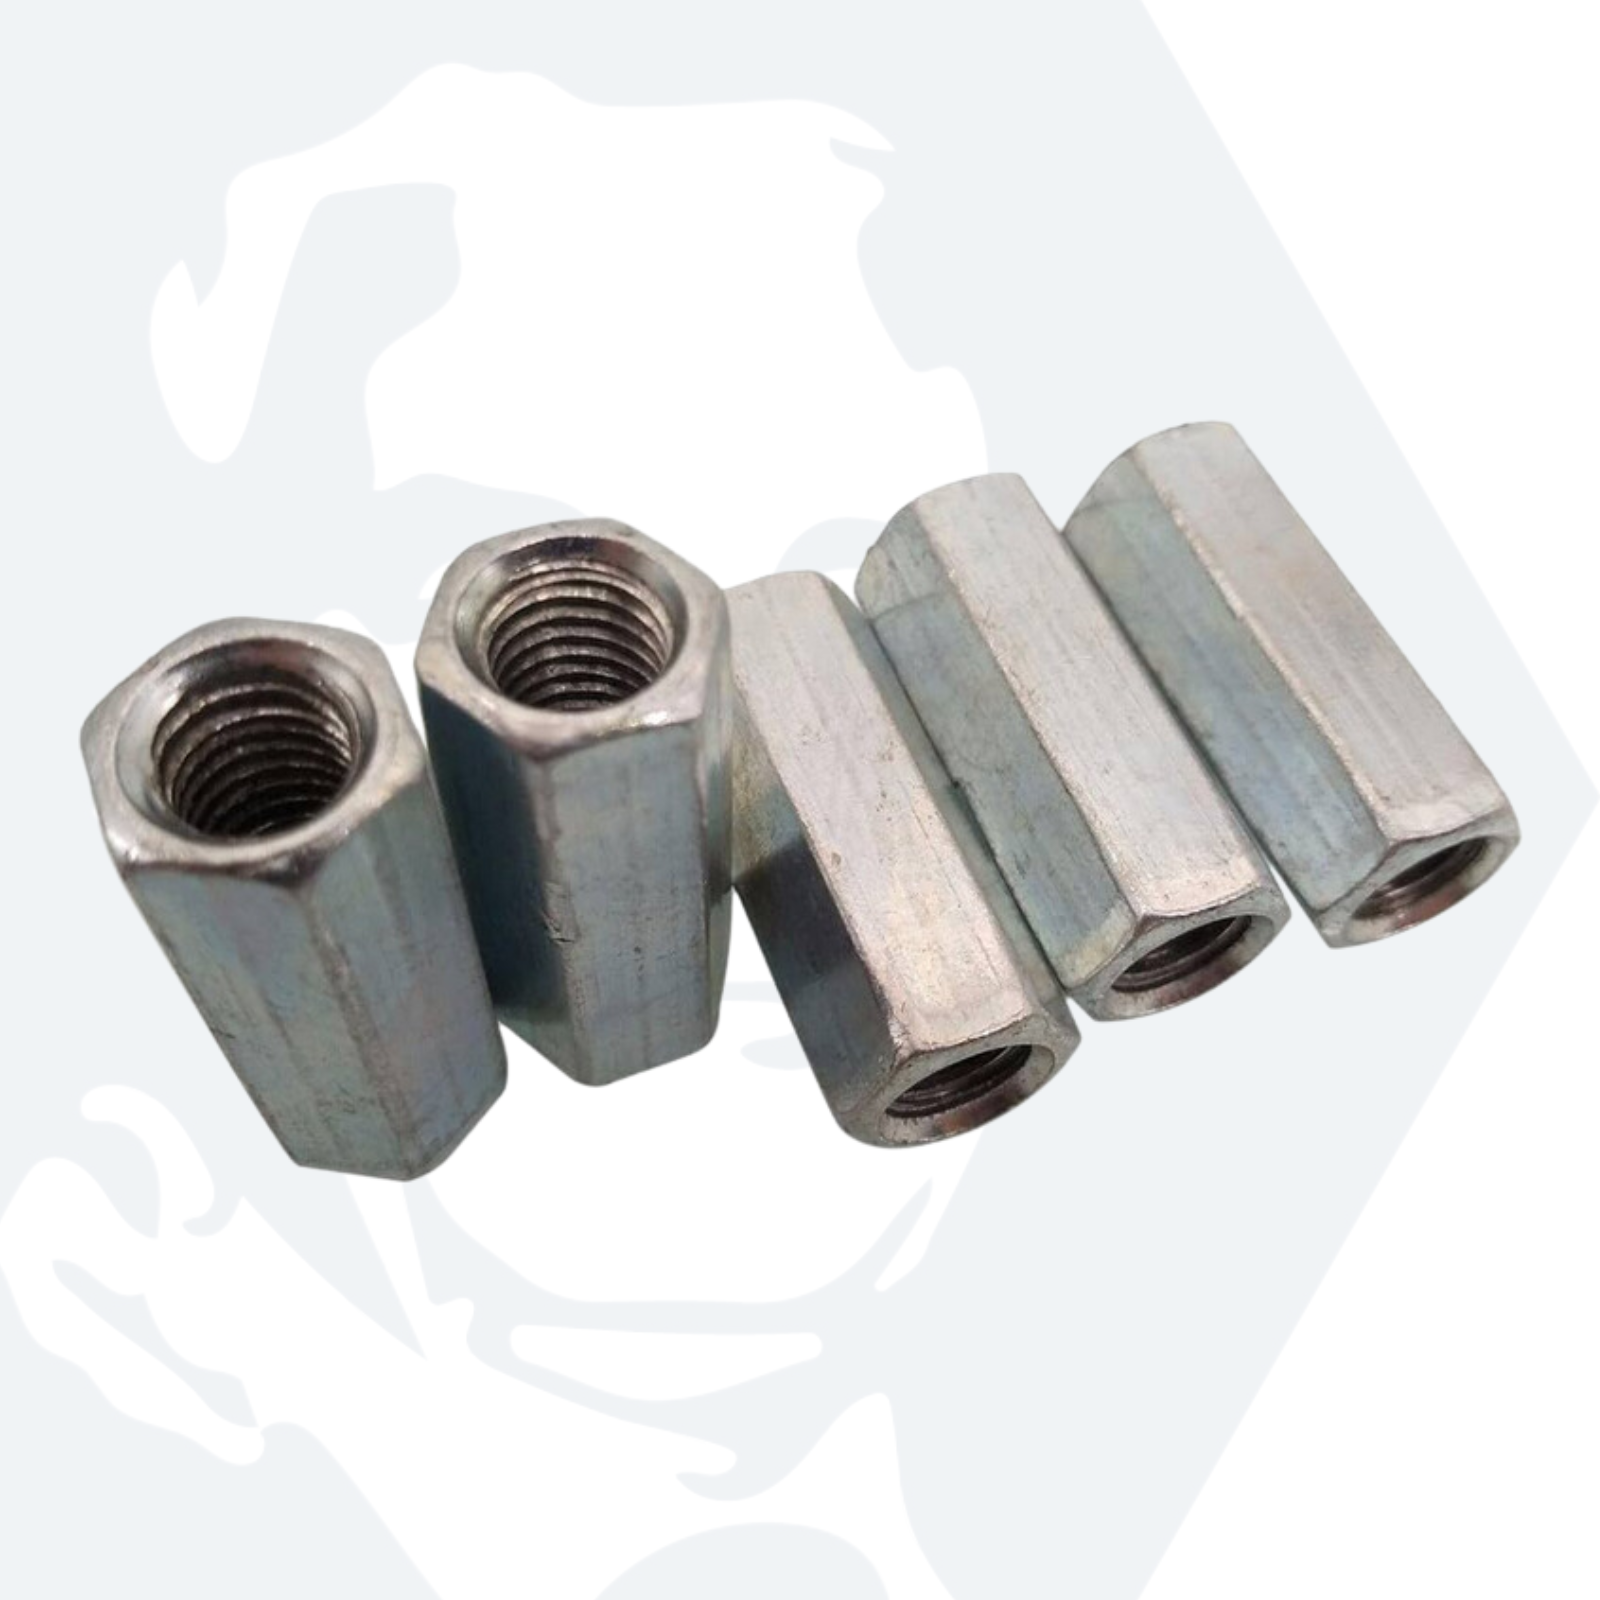 M8 Hexagon Connector Nuts - Zinc Plated Steel